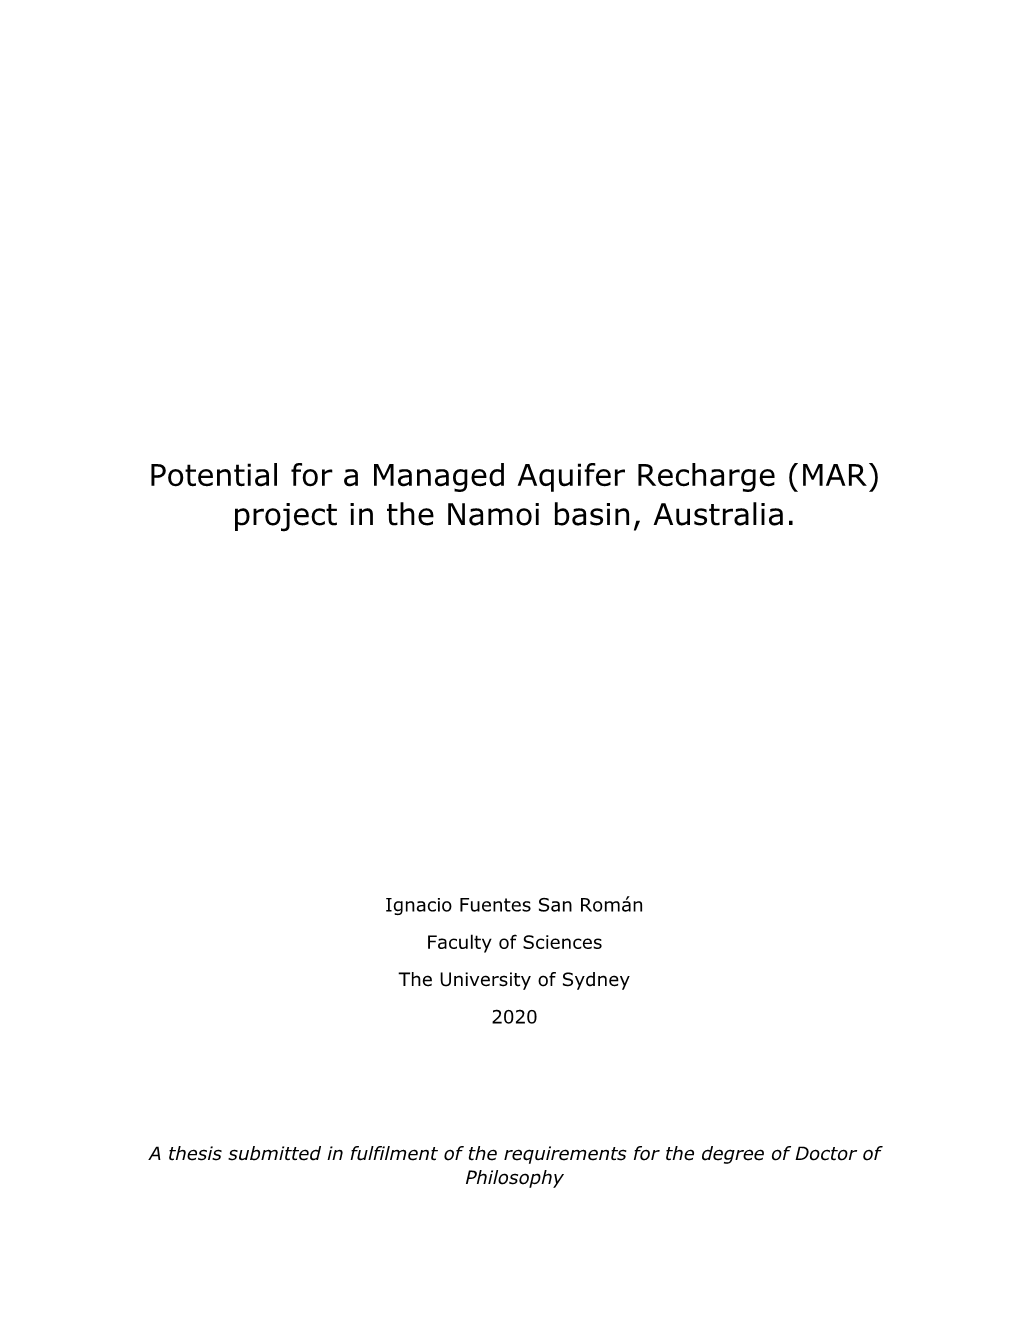 Potential for a Managed Aquifer Recharge (MAR) Project in the Namoi Basin, Australia